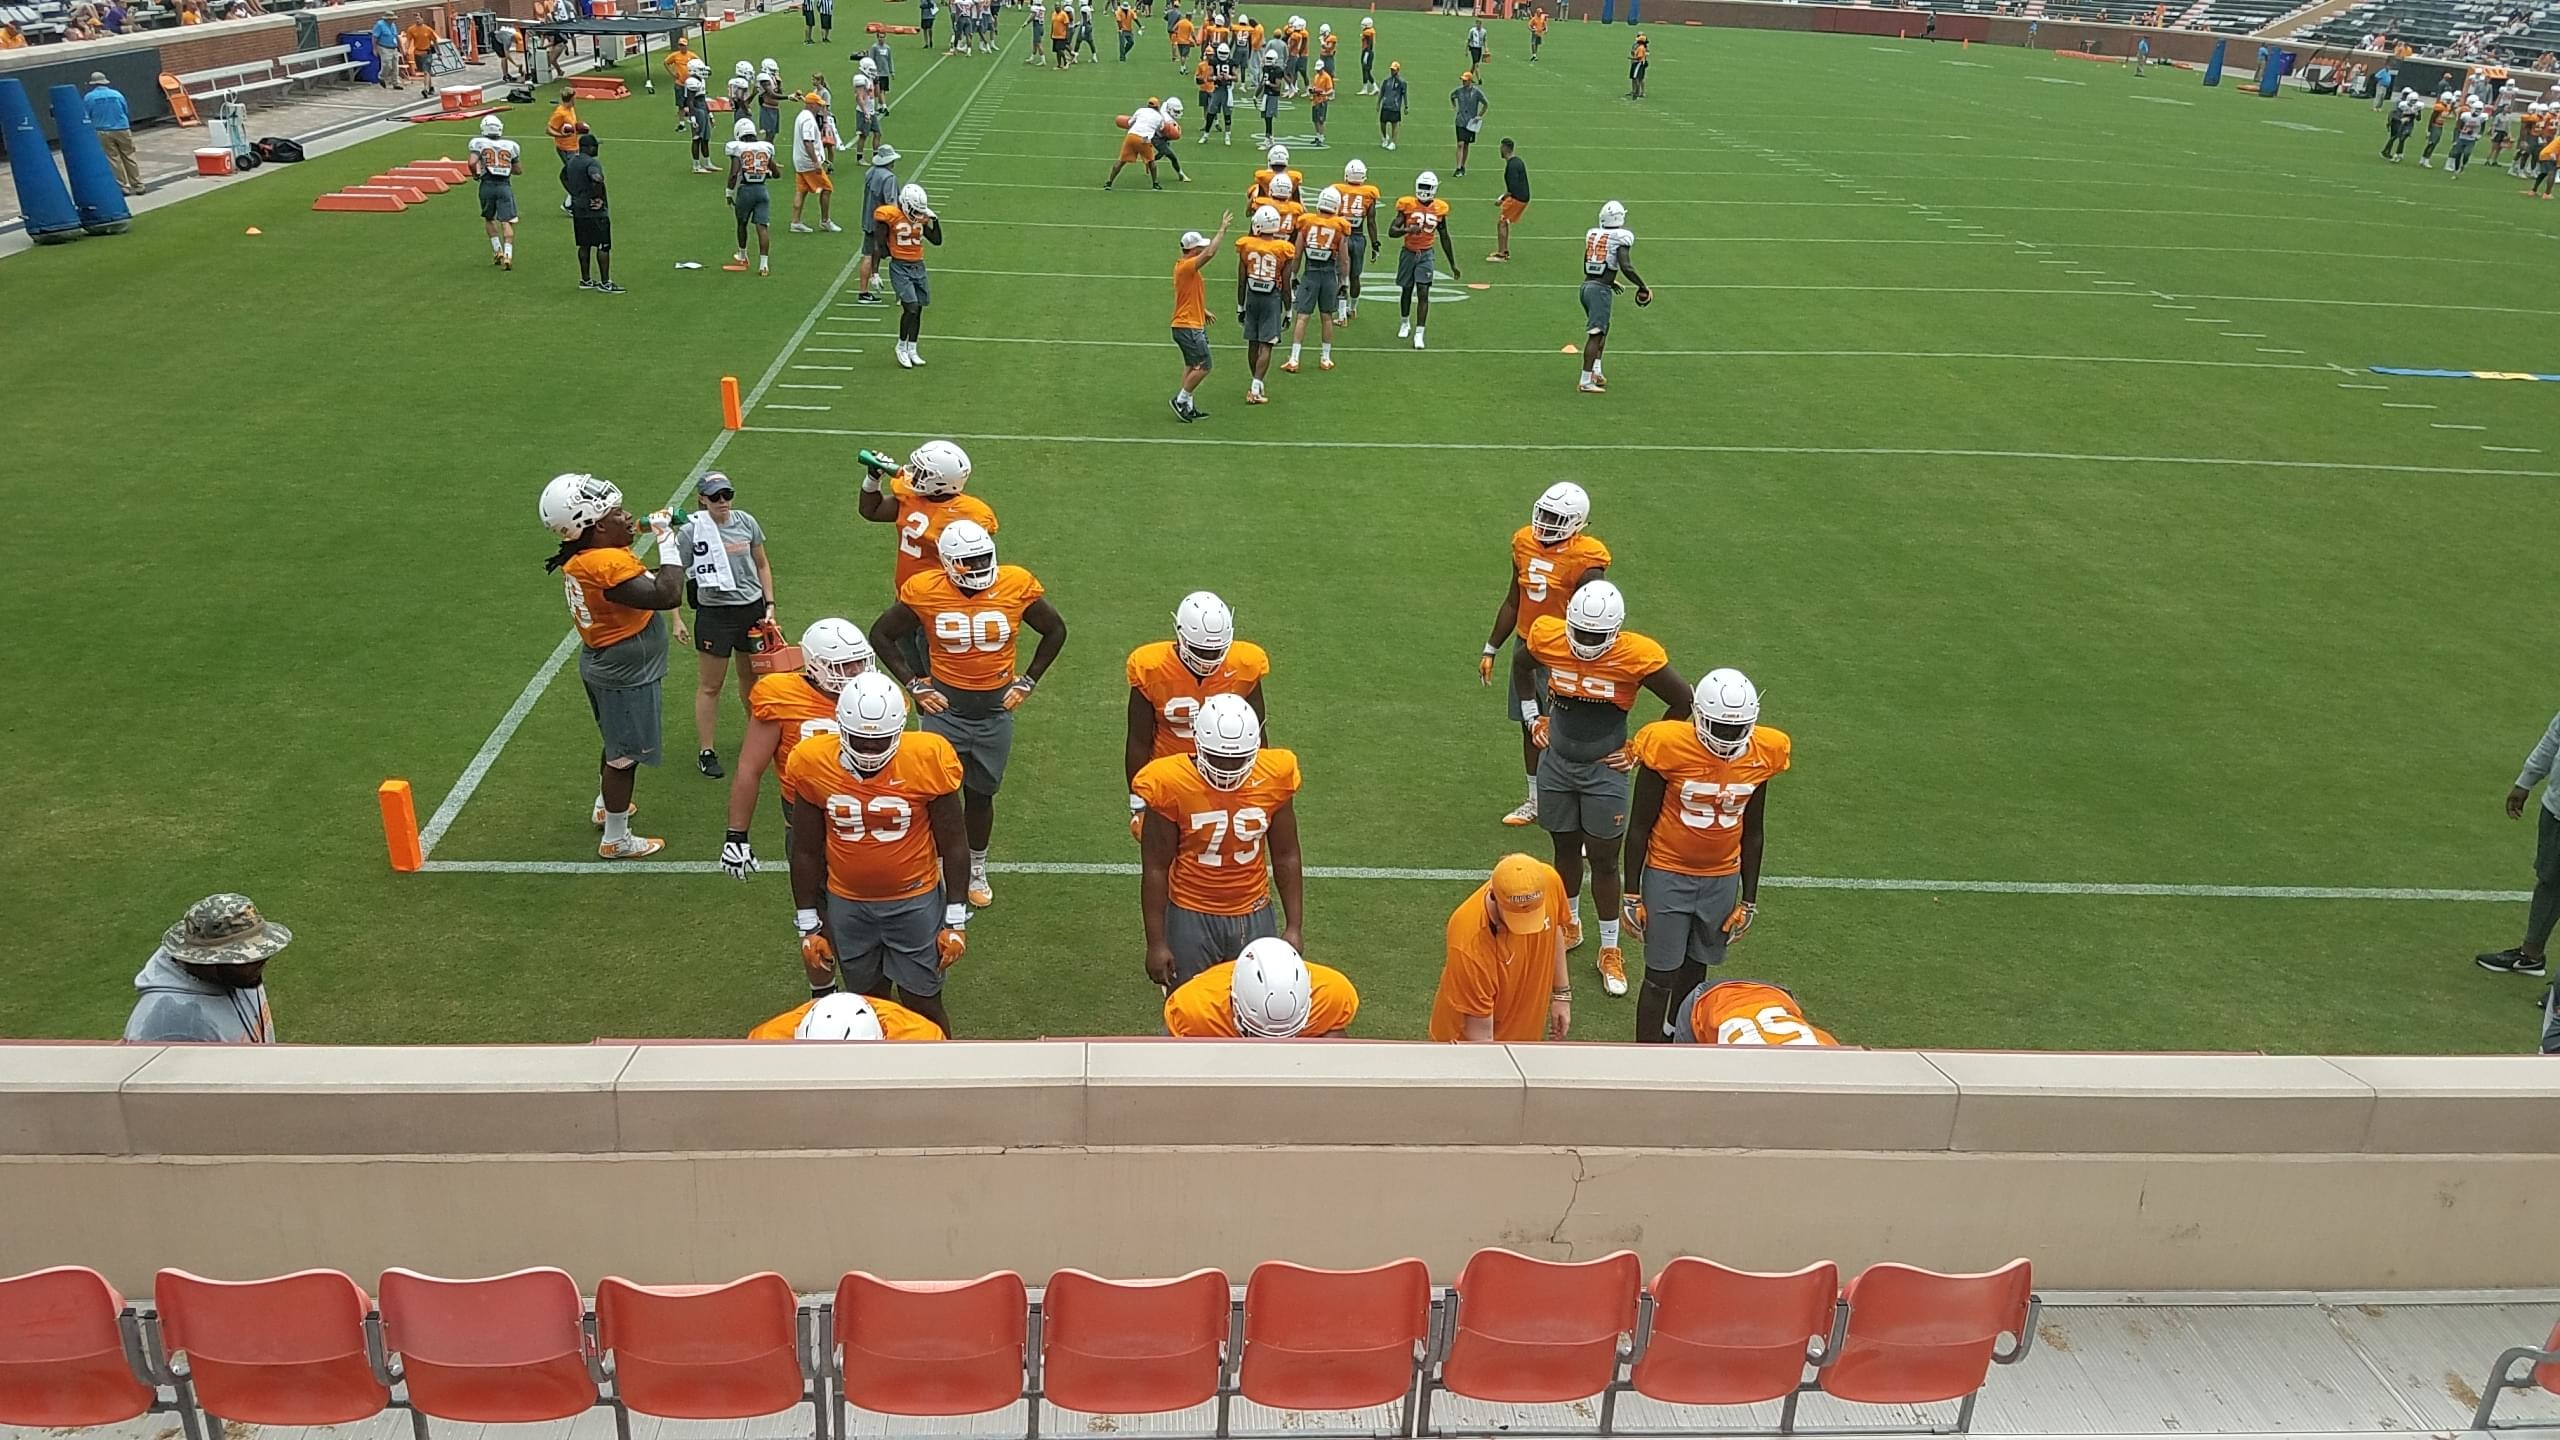 2560x1440 Video: Tennessee football fall practice 3 at Neyland (Defense)